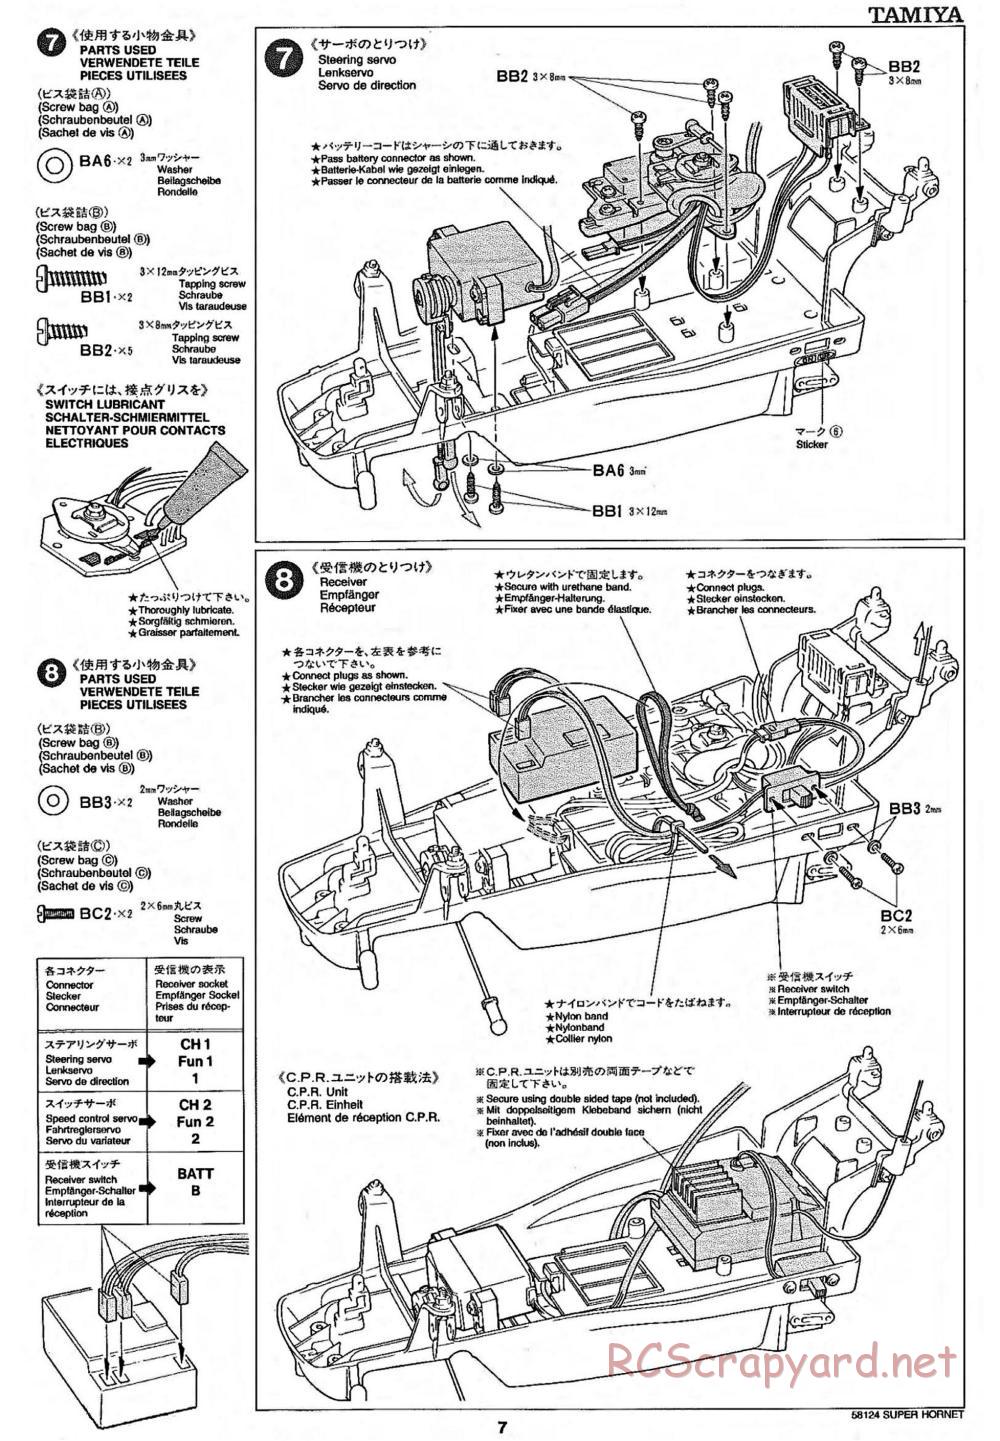 Tamiya - Super Hornet Chassis - Manual - Page 7